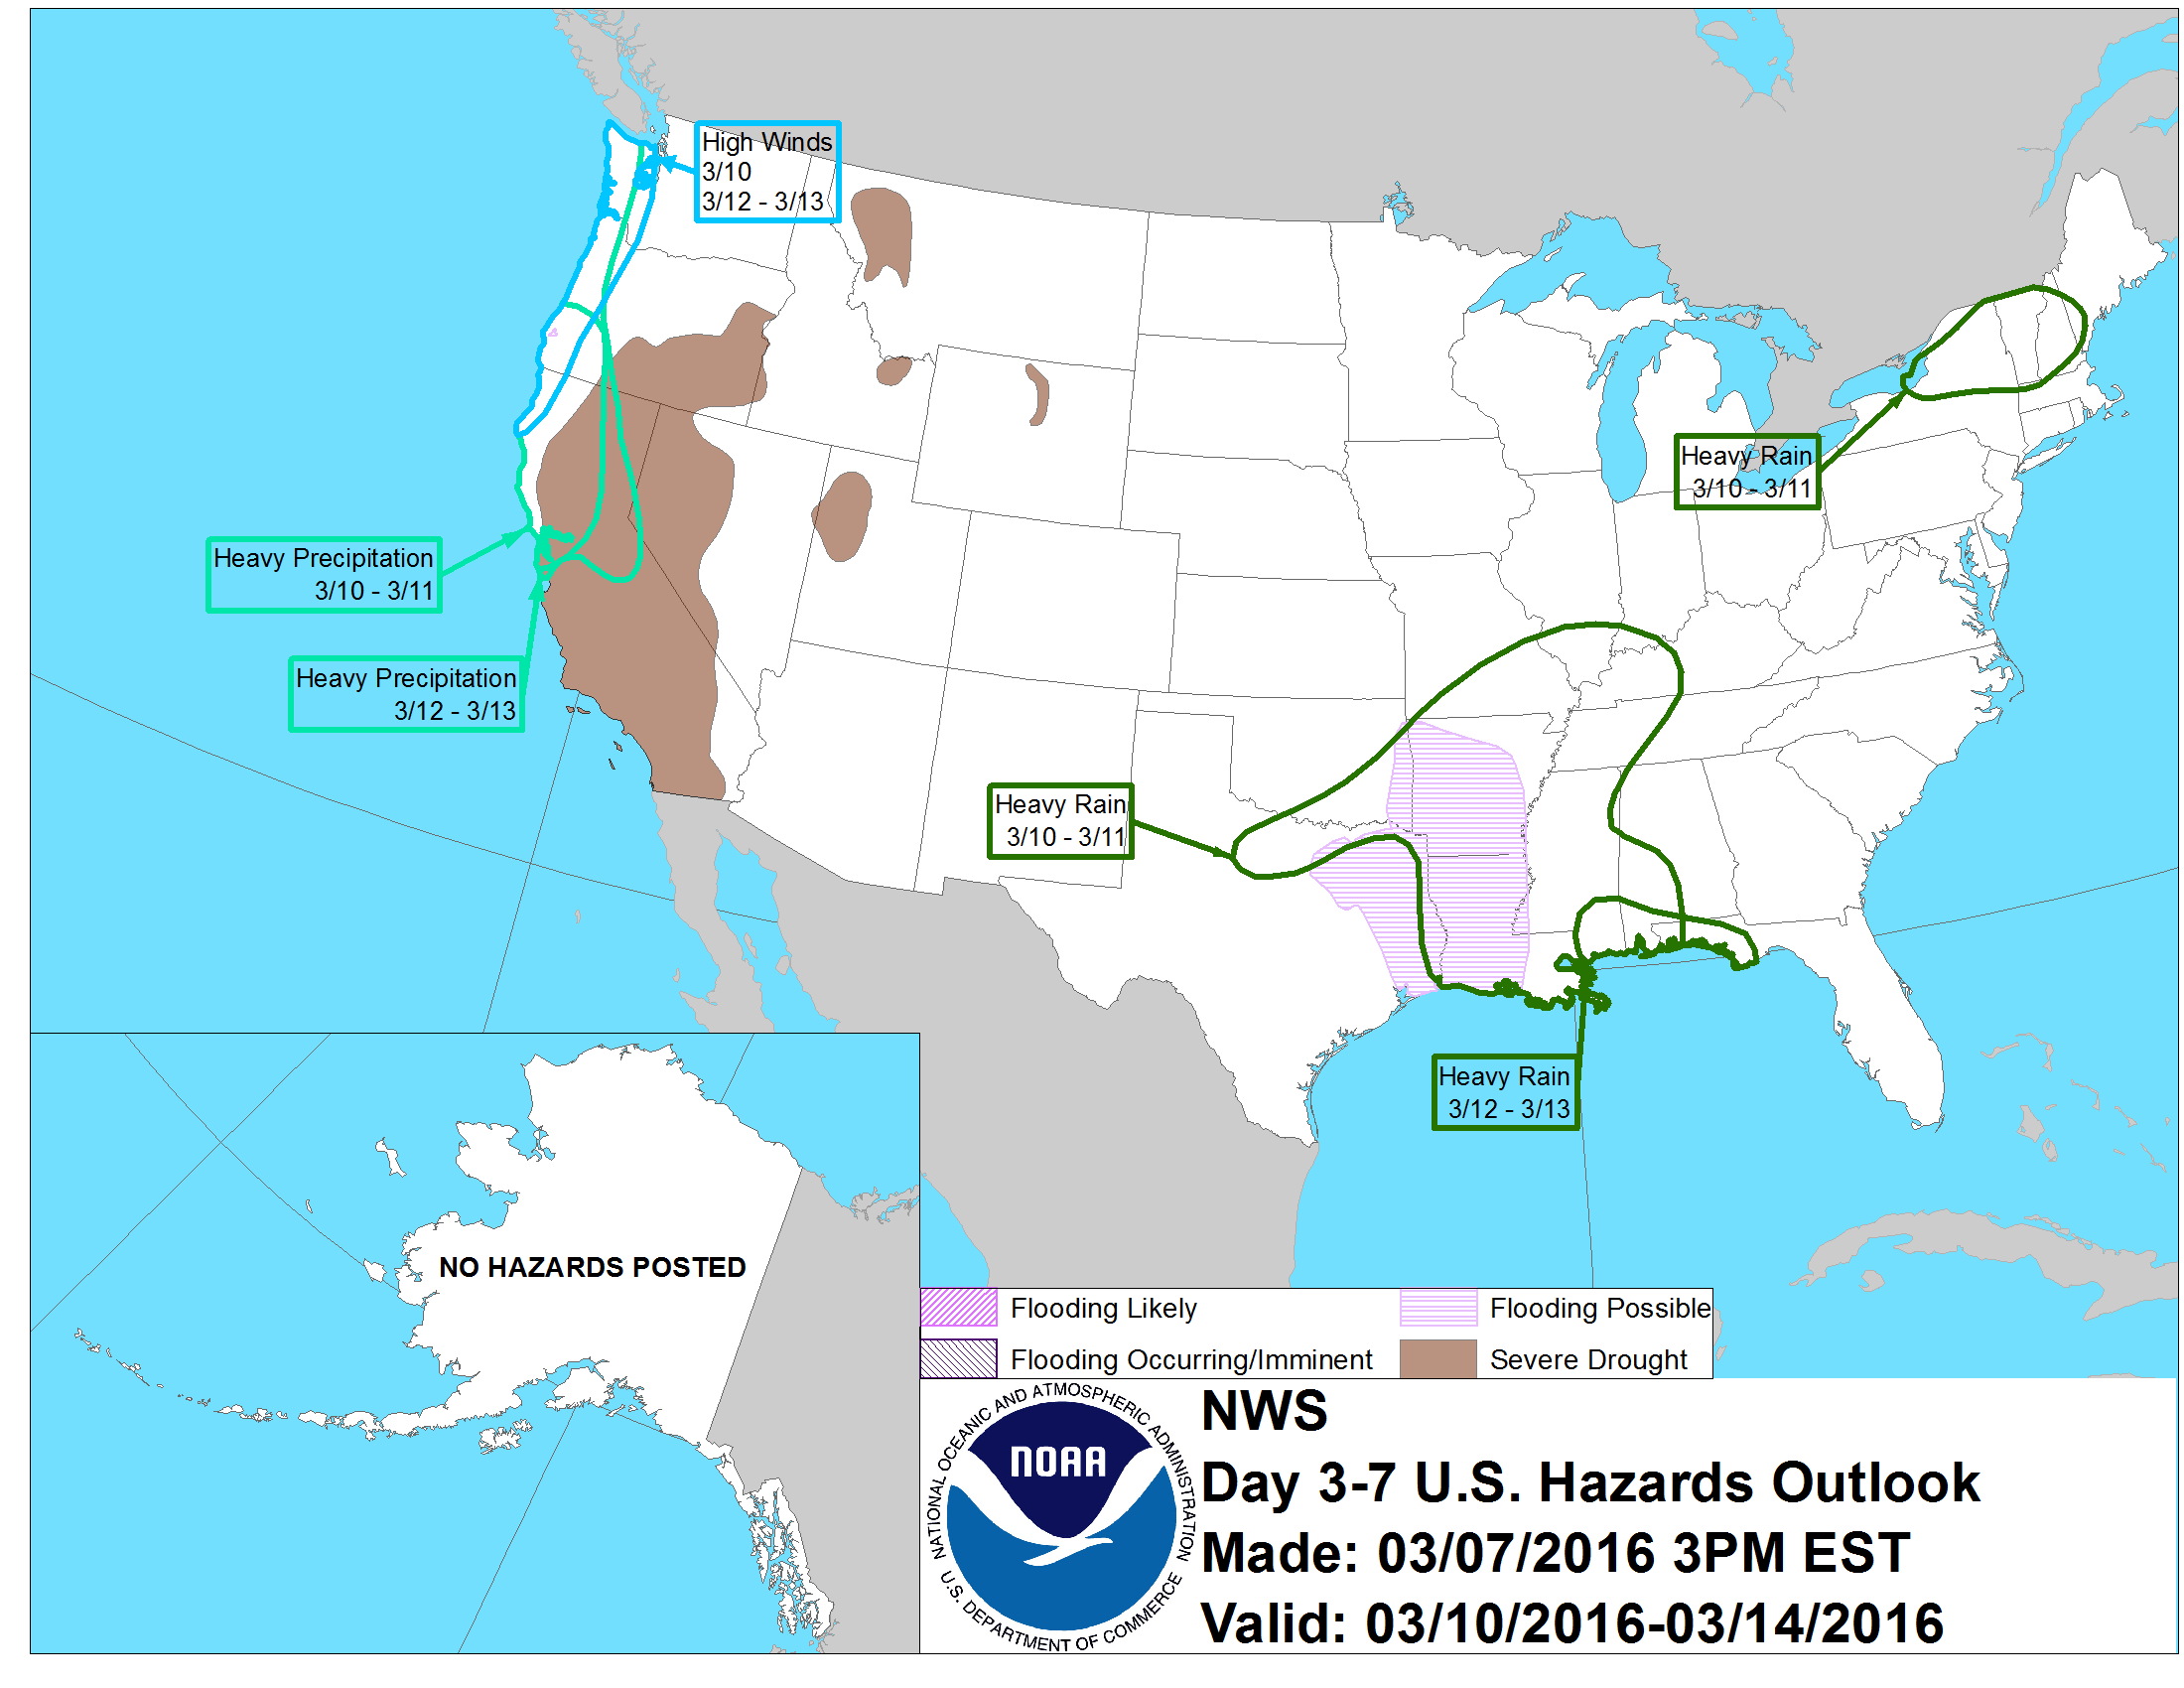 "Heavy Precipitation" forecast on the West Coast from March 10-13th. image: noaa, today